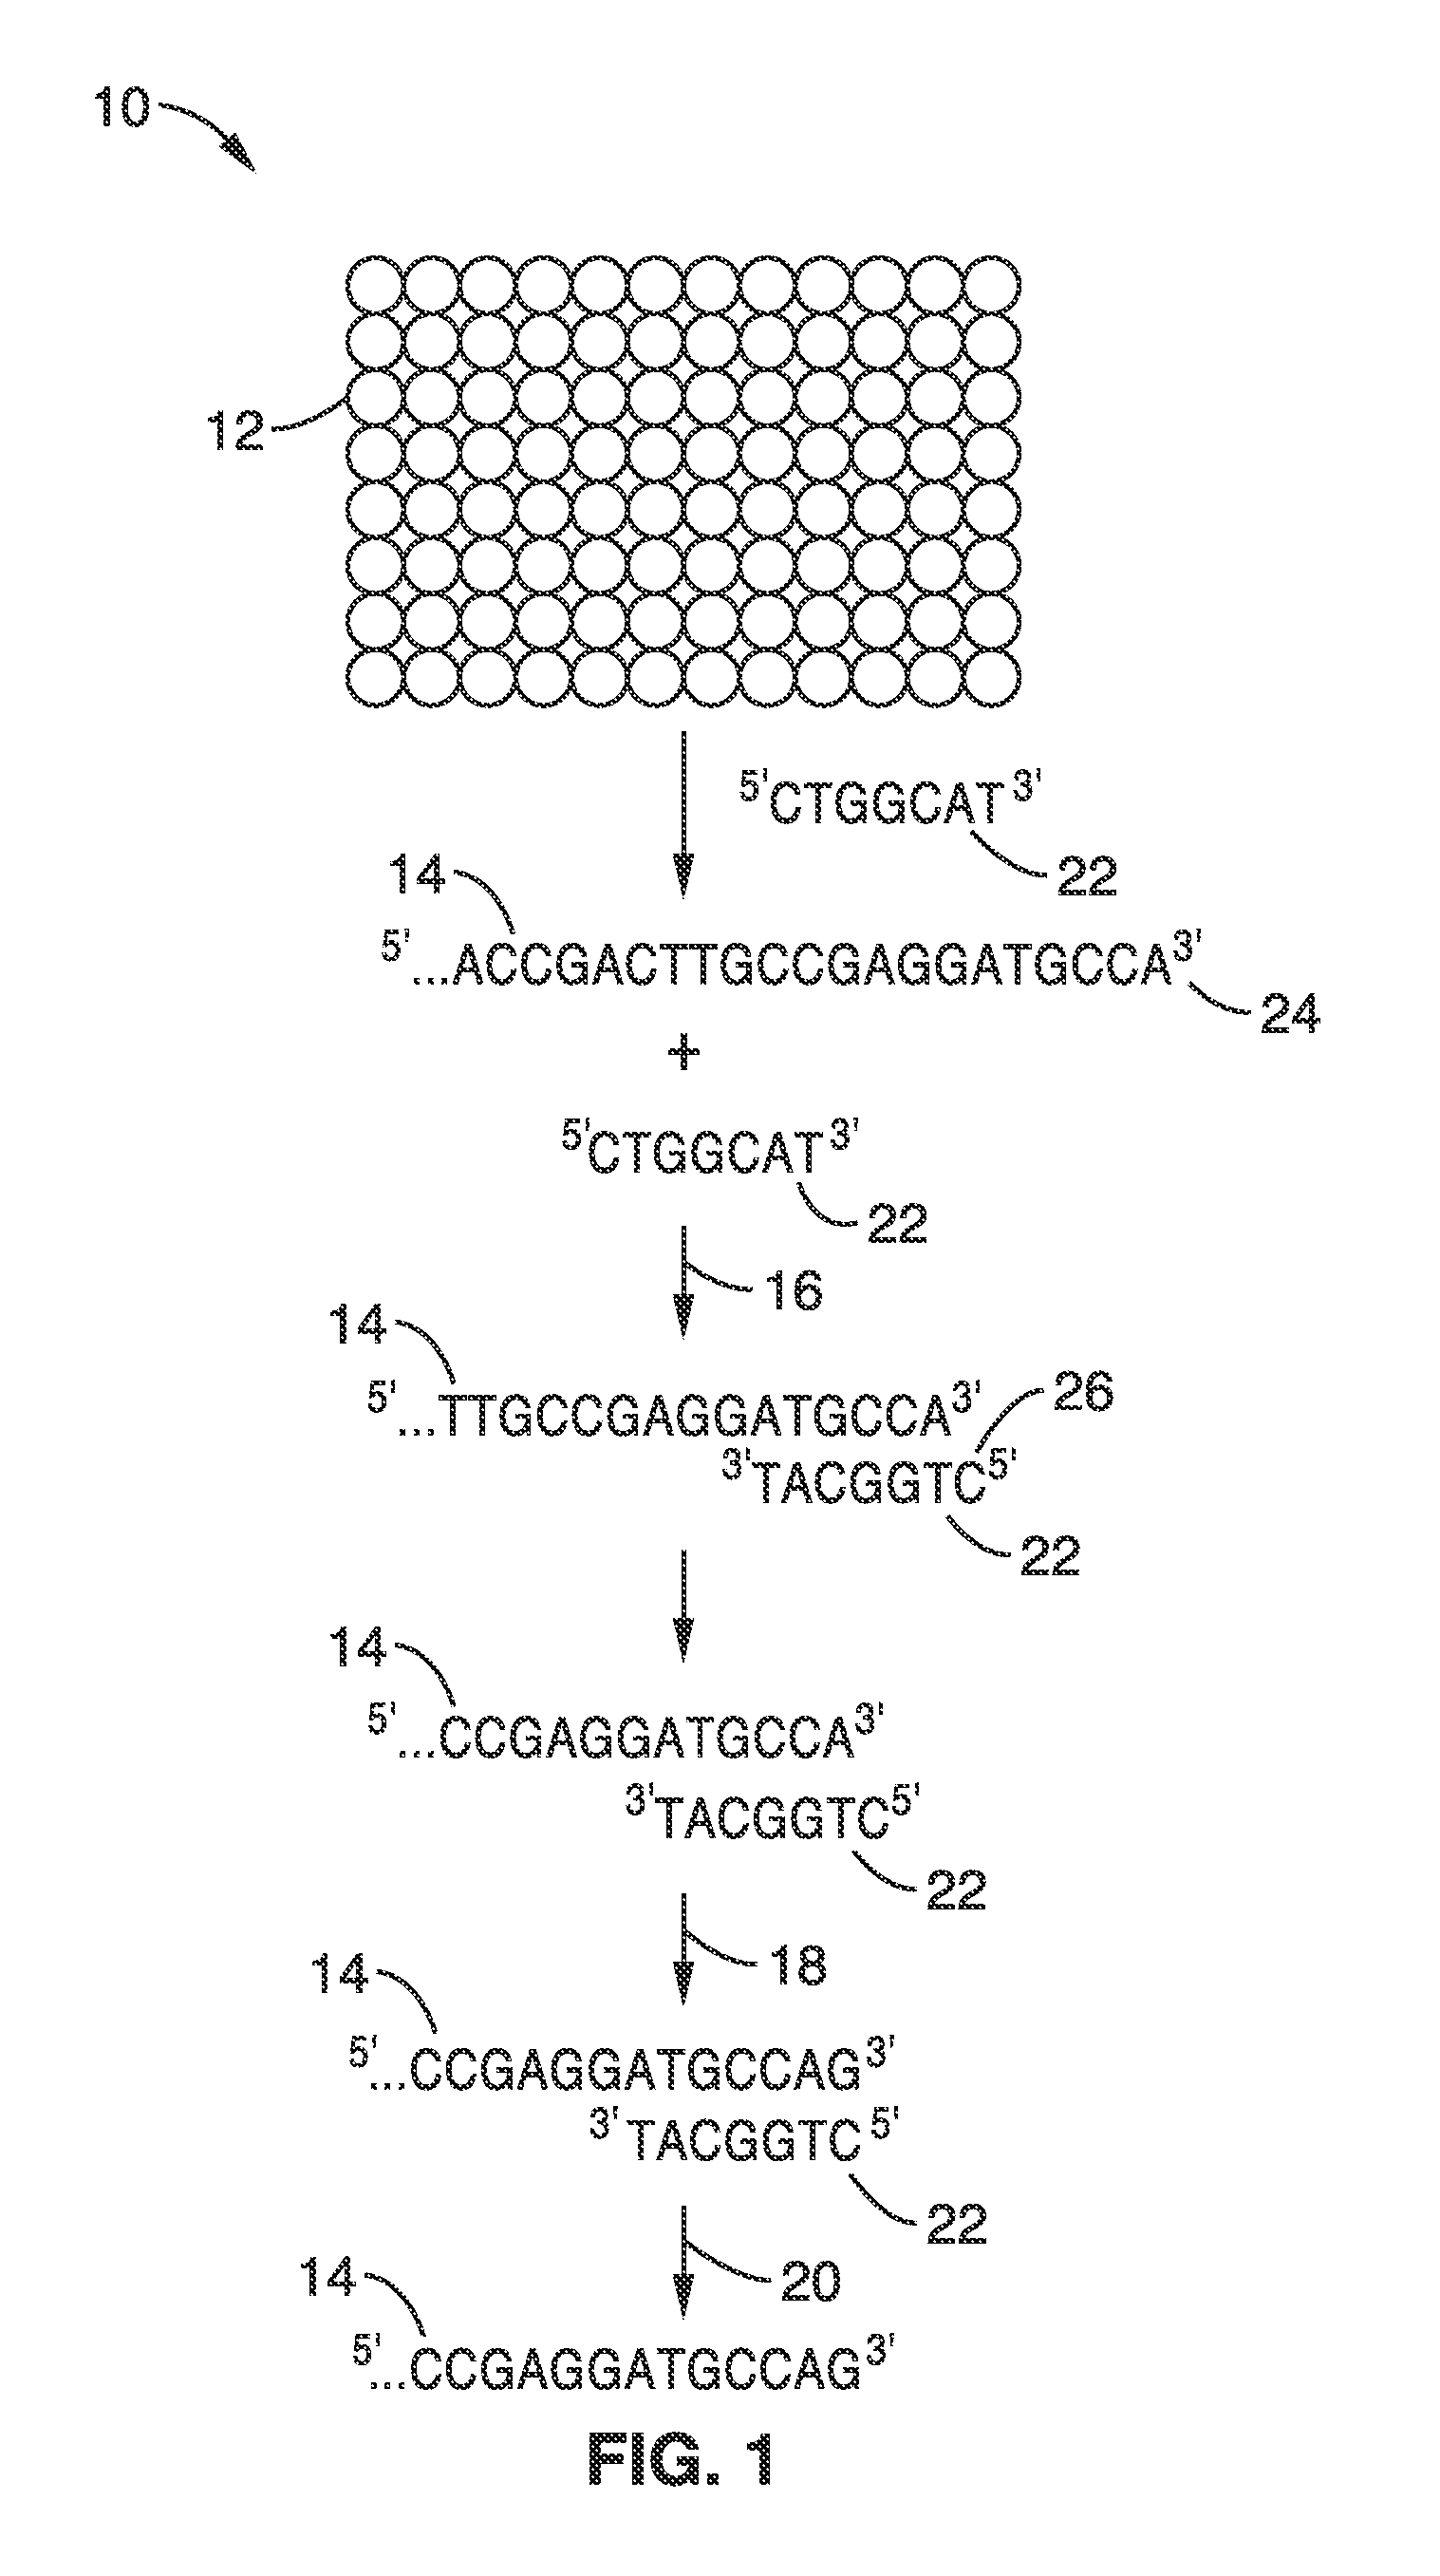 Methods and apparatus for nucleic acid synthesis using oligo-templated polymerization